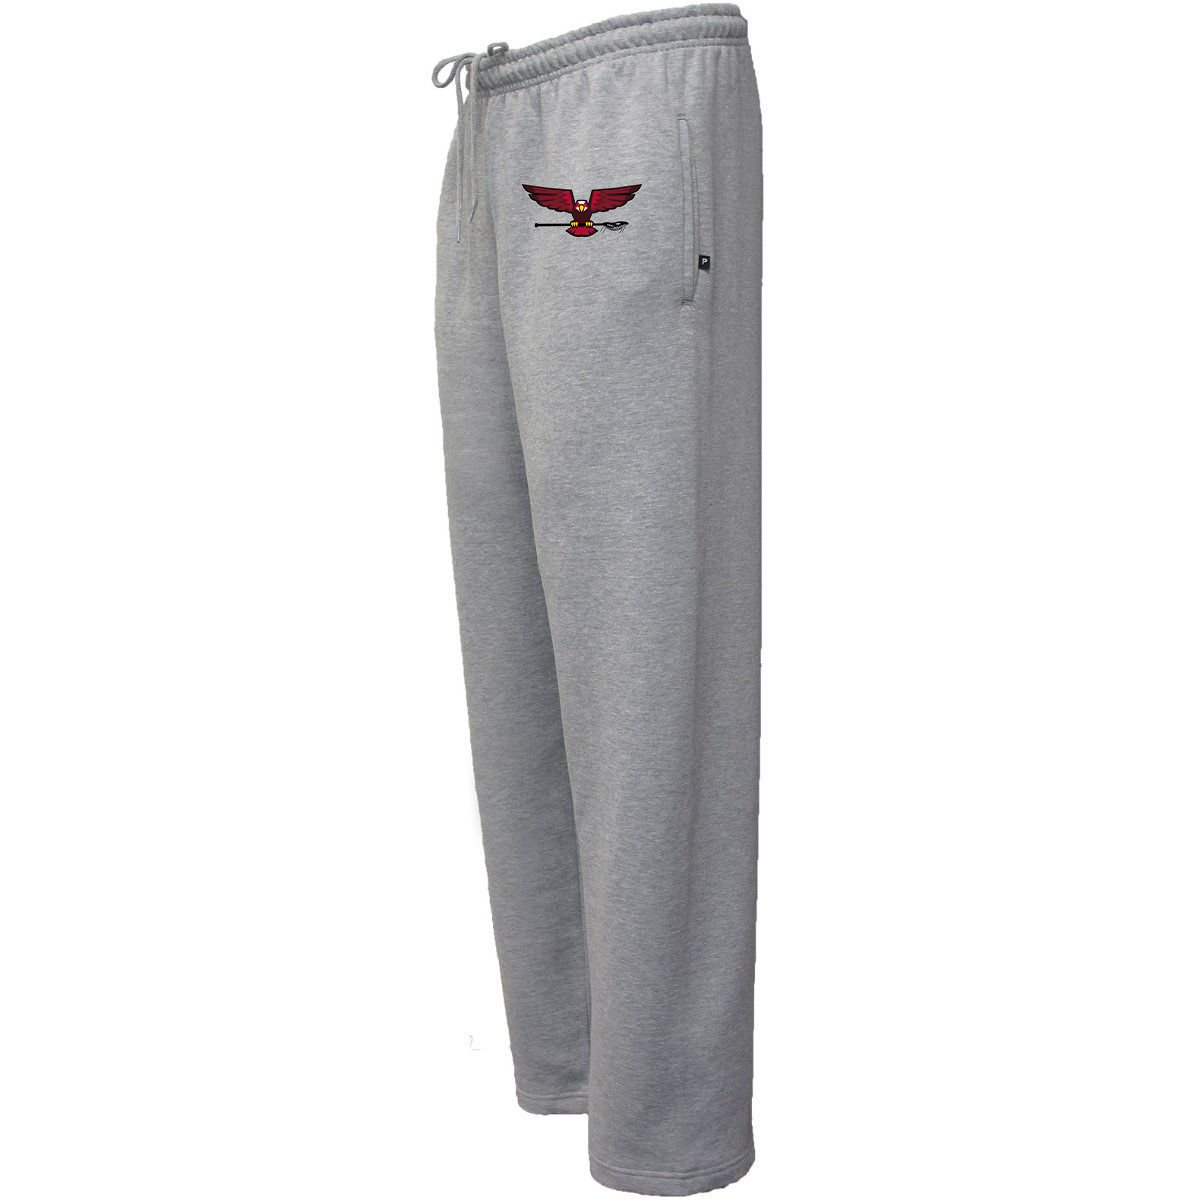 North Tapps Legacy Lacrosse Sweatpants